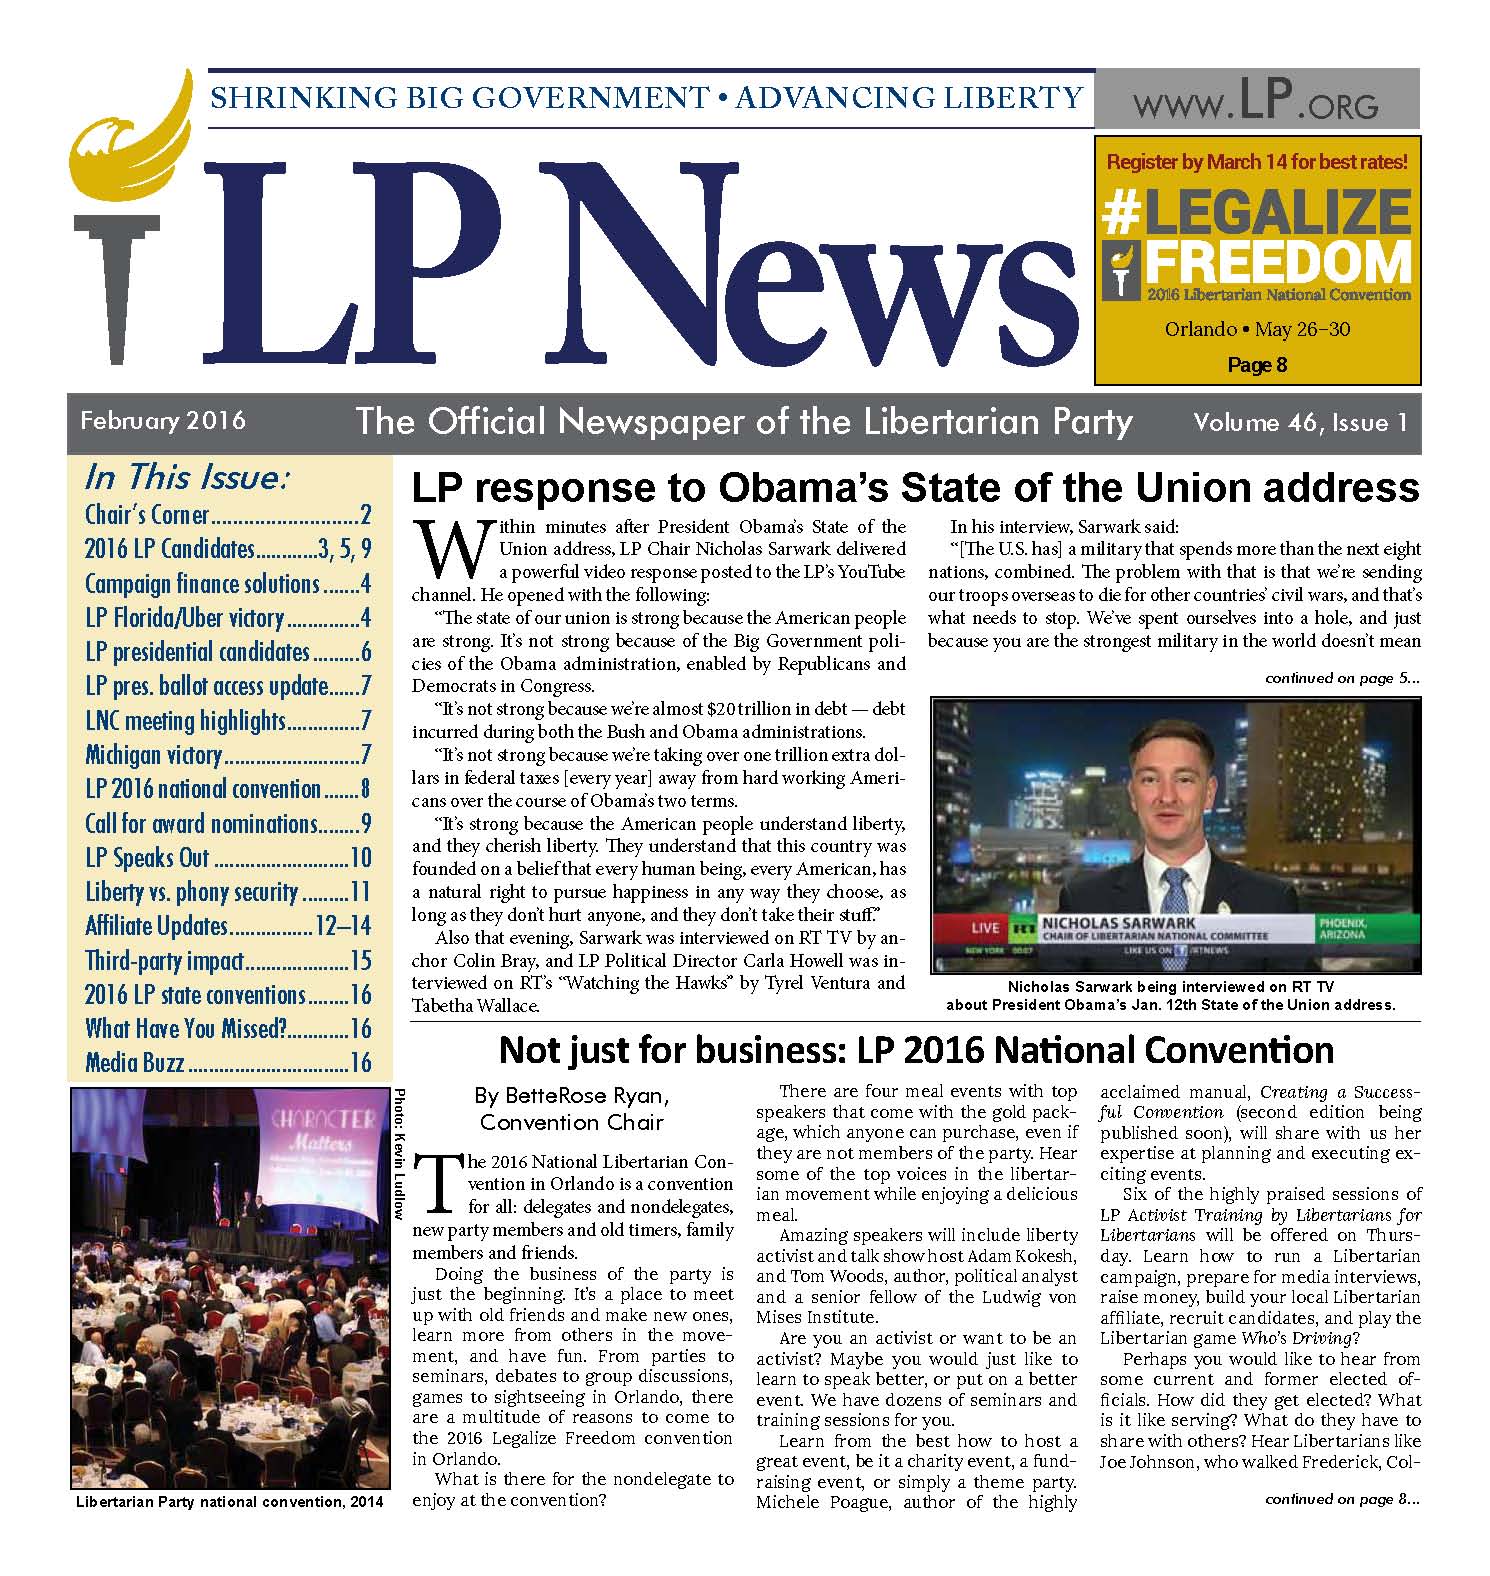 LP News Feb 2016 issue, front page (image)